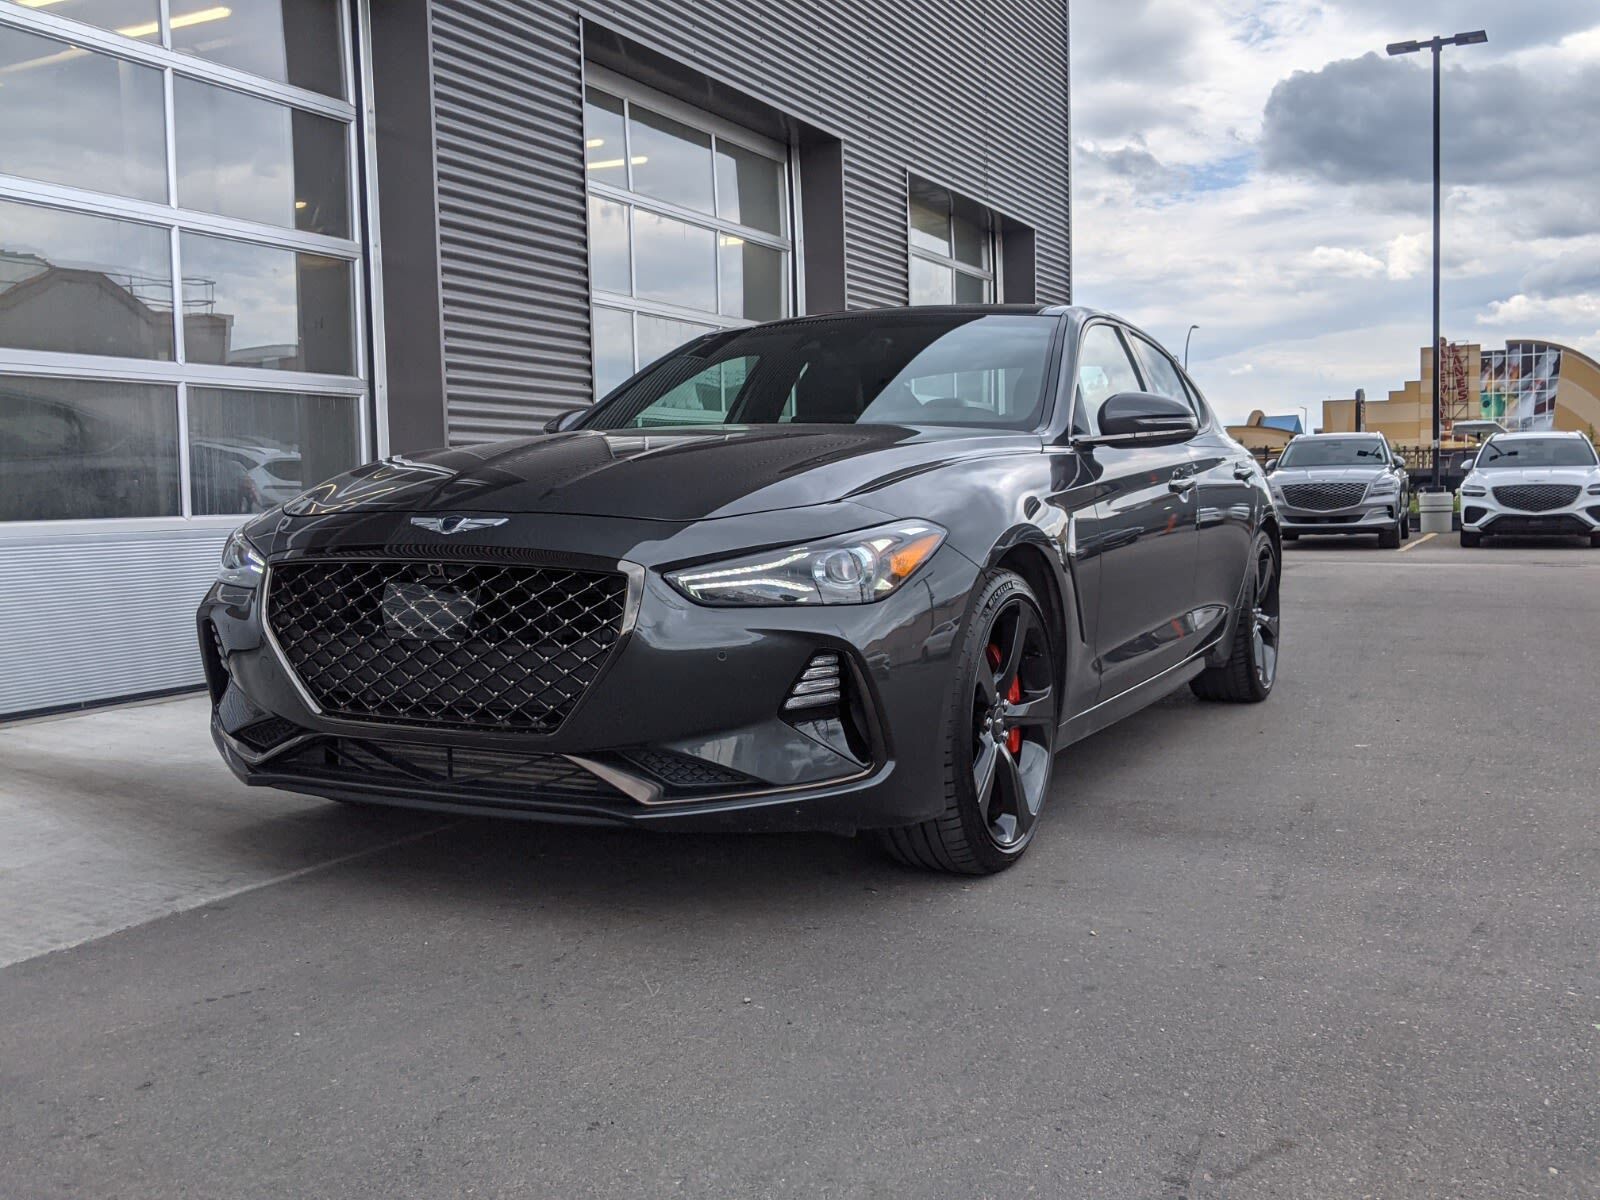 2020 Genesis G70 3.3T Sport - No Accidents! Low Kms!